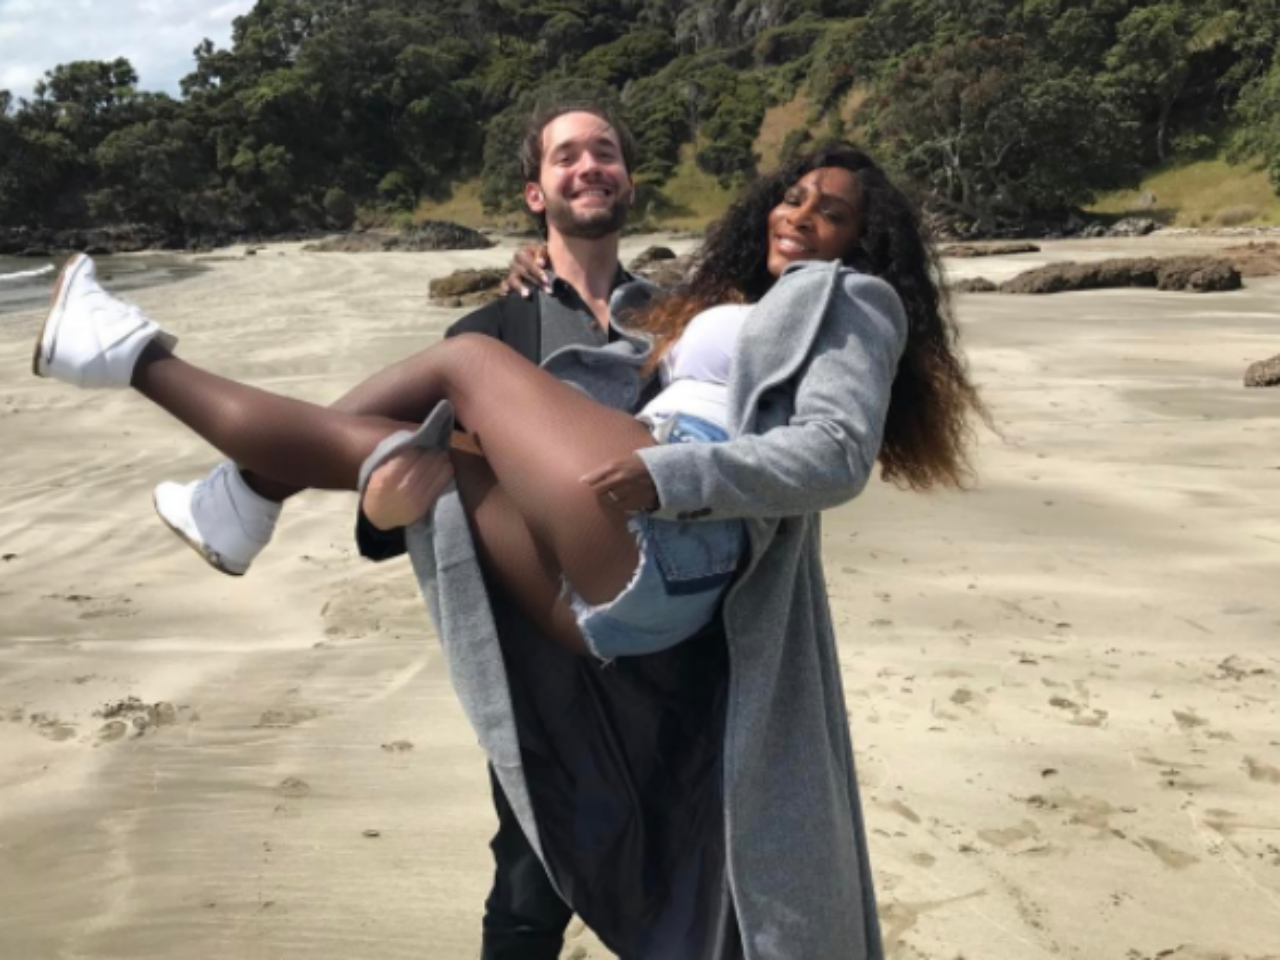 Serena Williams and fiancee Alexis Ohanian on the beach